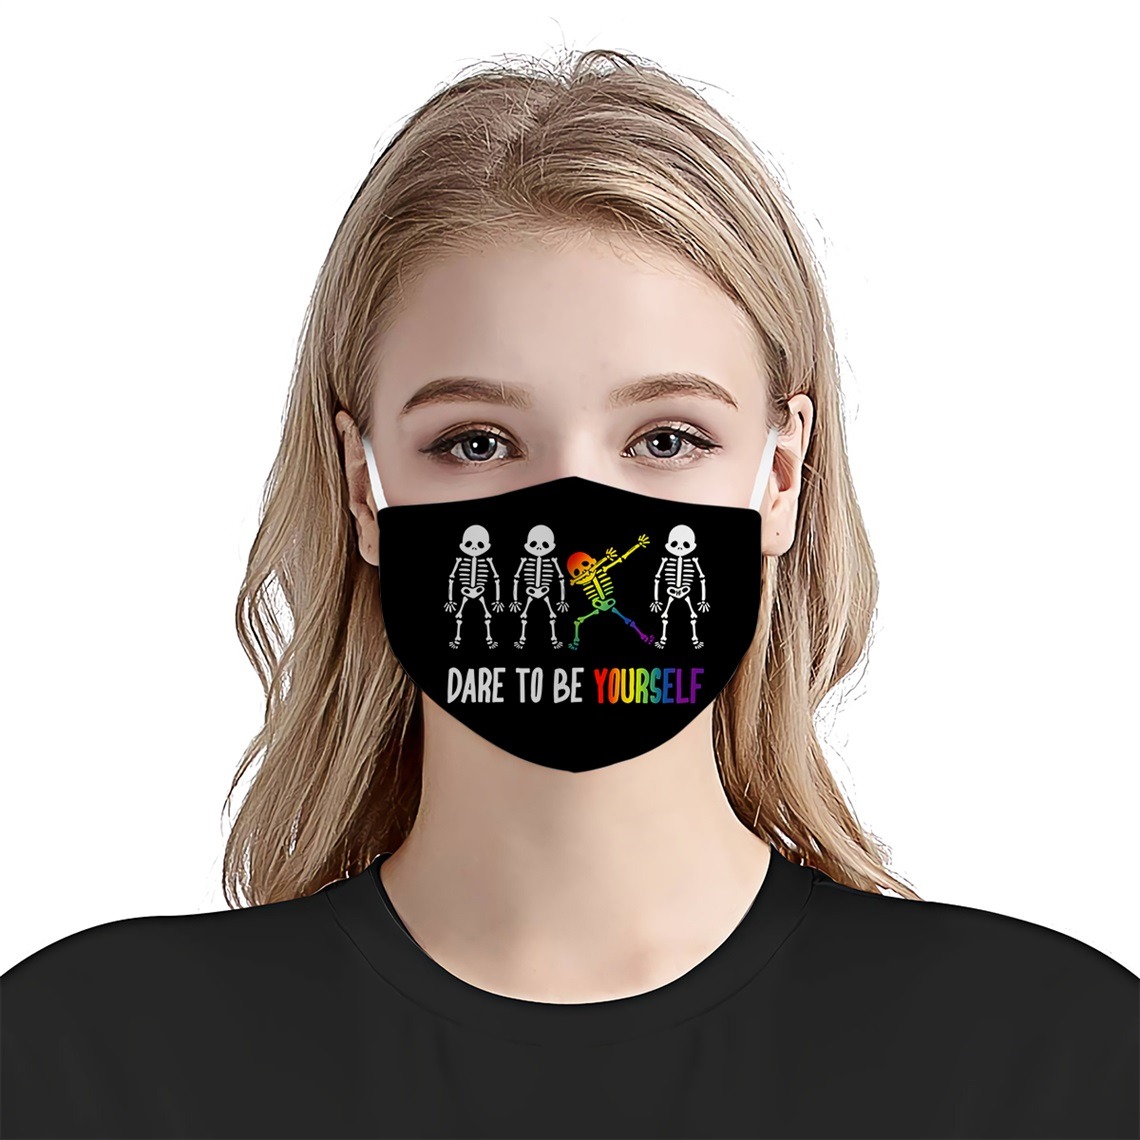 Skeleton dare to be yourself lgbt pride face mask